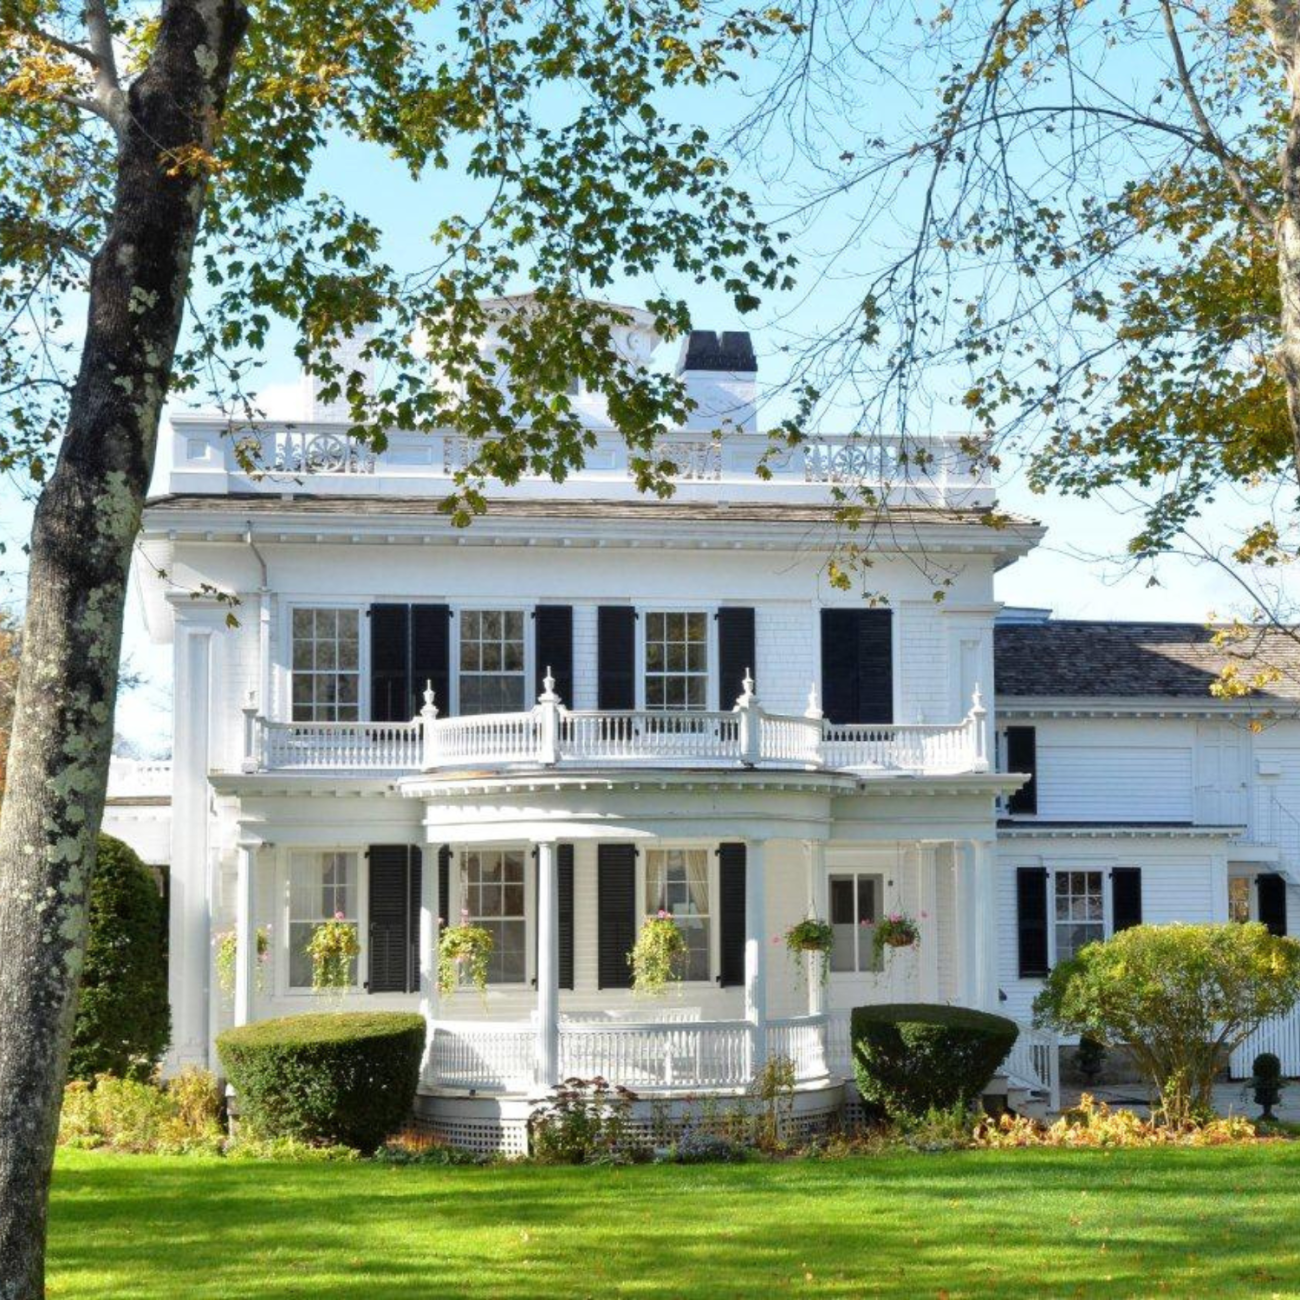 A white, two-story, historic mansion. Black shutters near windows, green lawn.